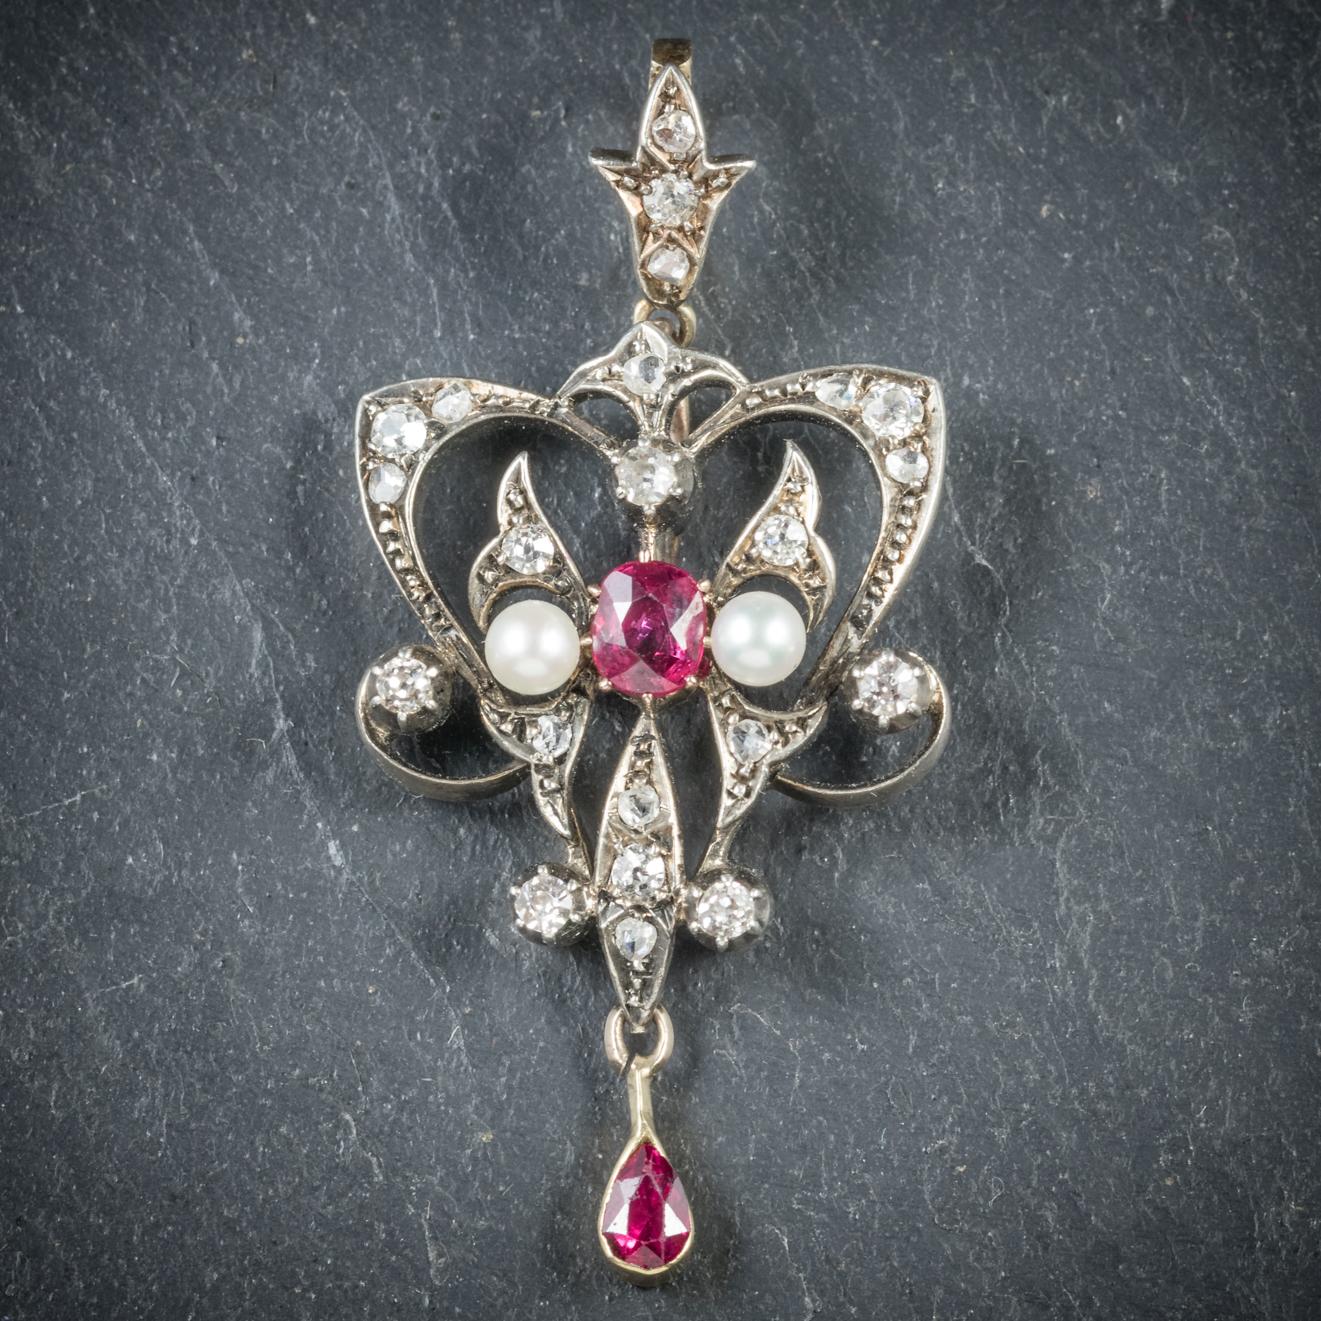 This beautiful antique Ruby and Diamond pendant is from the Victorian era, Circa 1900

The lovely pendant is adorned with a 0.10ct Ruby dropper with a rich pink 0.25ct Ruby in the centre flanked by two lustrous Pearls

The gallery is set in Platinum